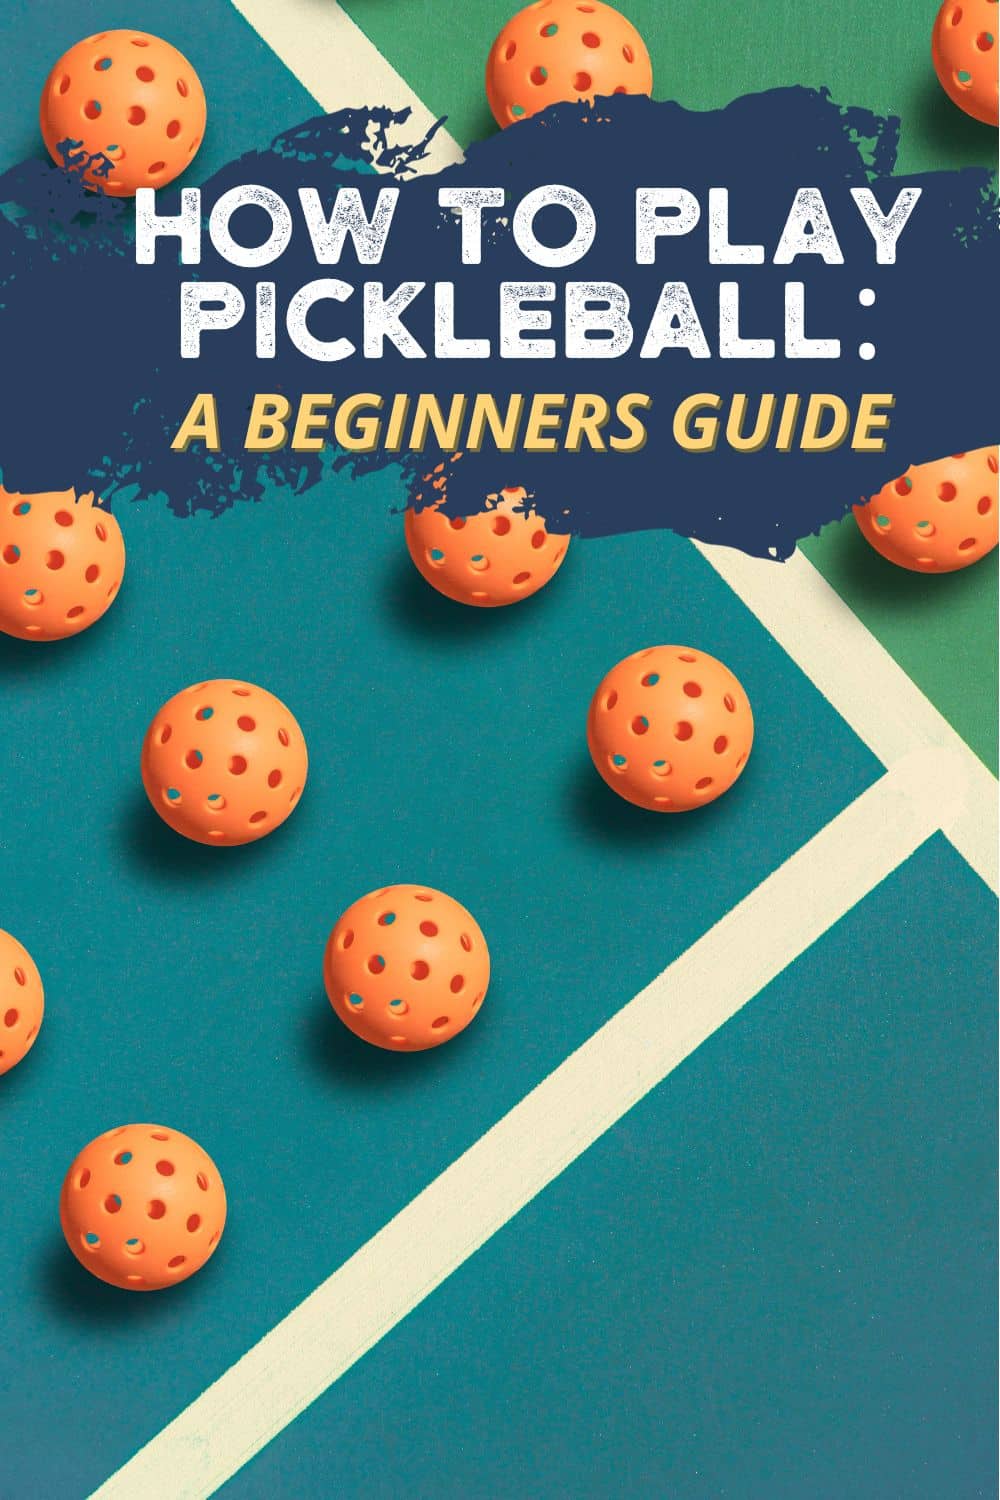 Picture of pickleballs on a pickleball court with the words How to Play Pickleball: A Beginners Guide on the picture